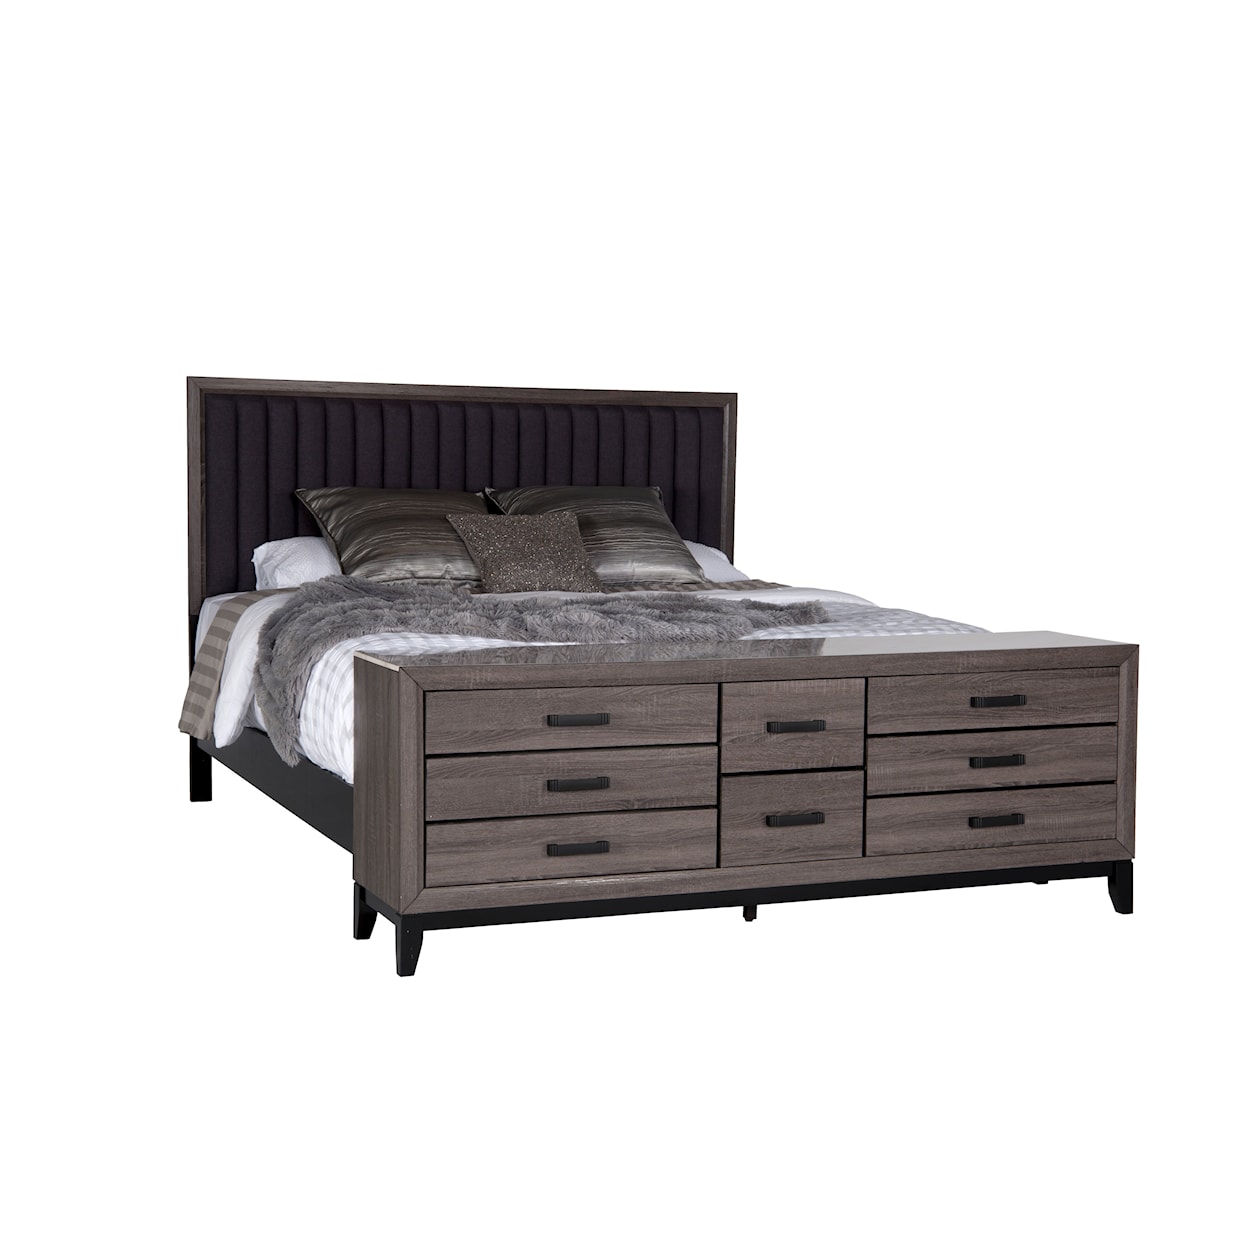 Global Furniture LAURA King Bed with Storage